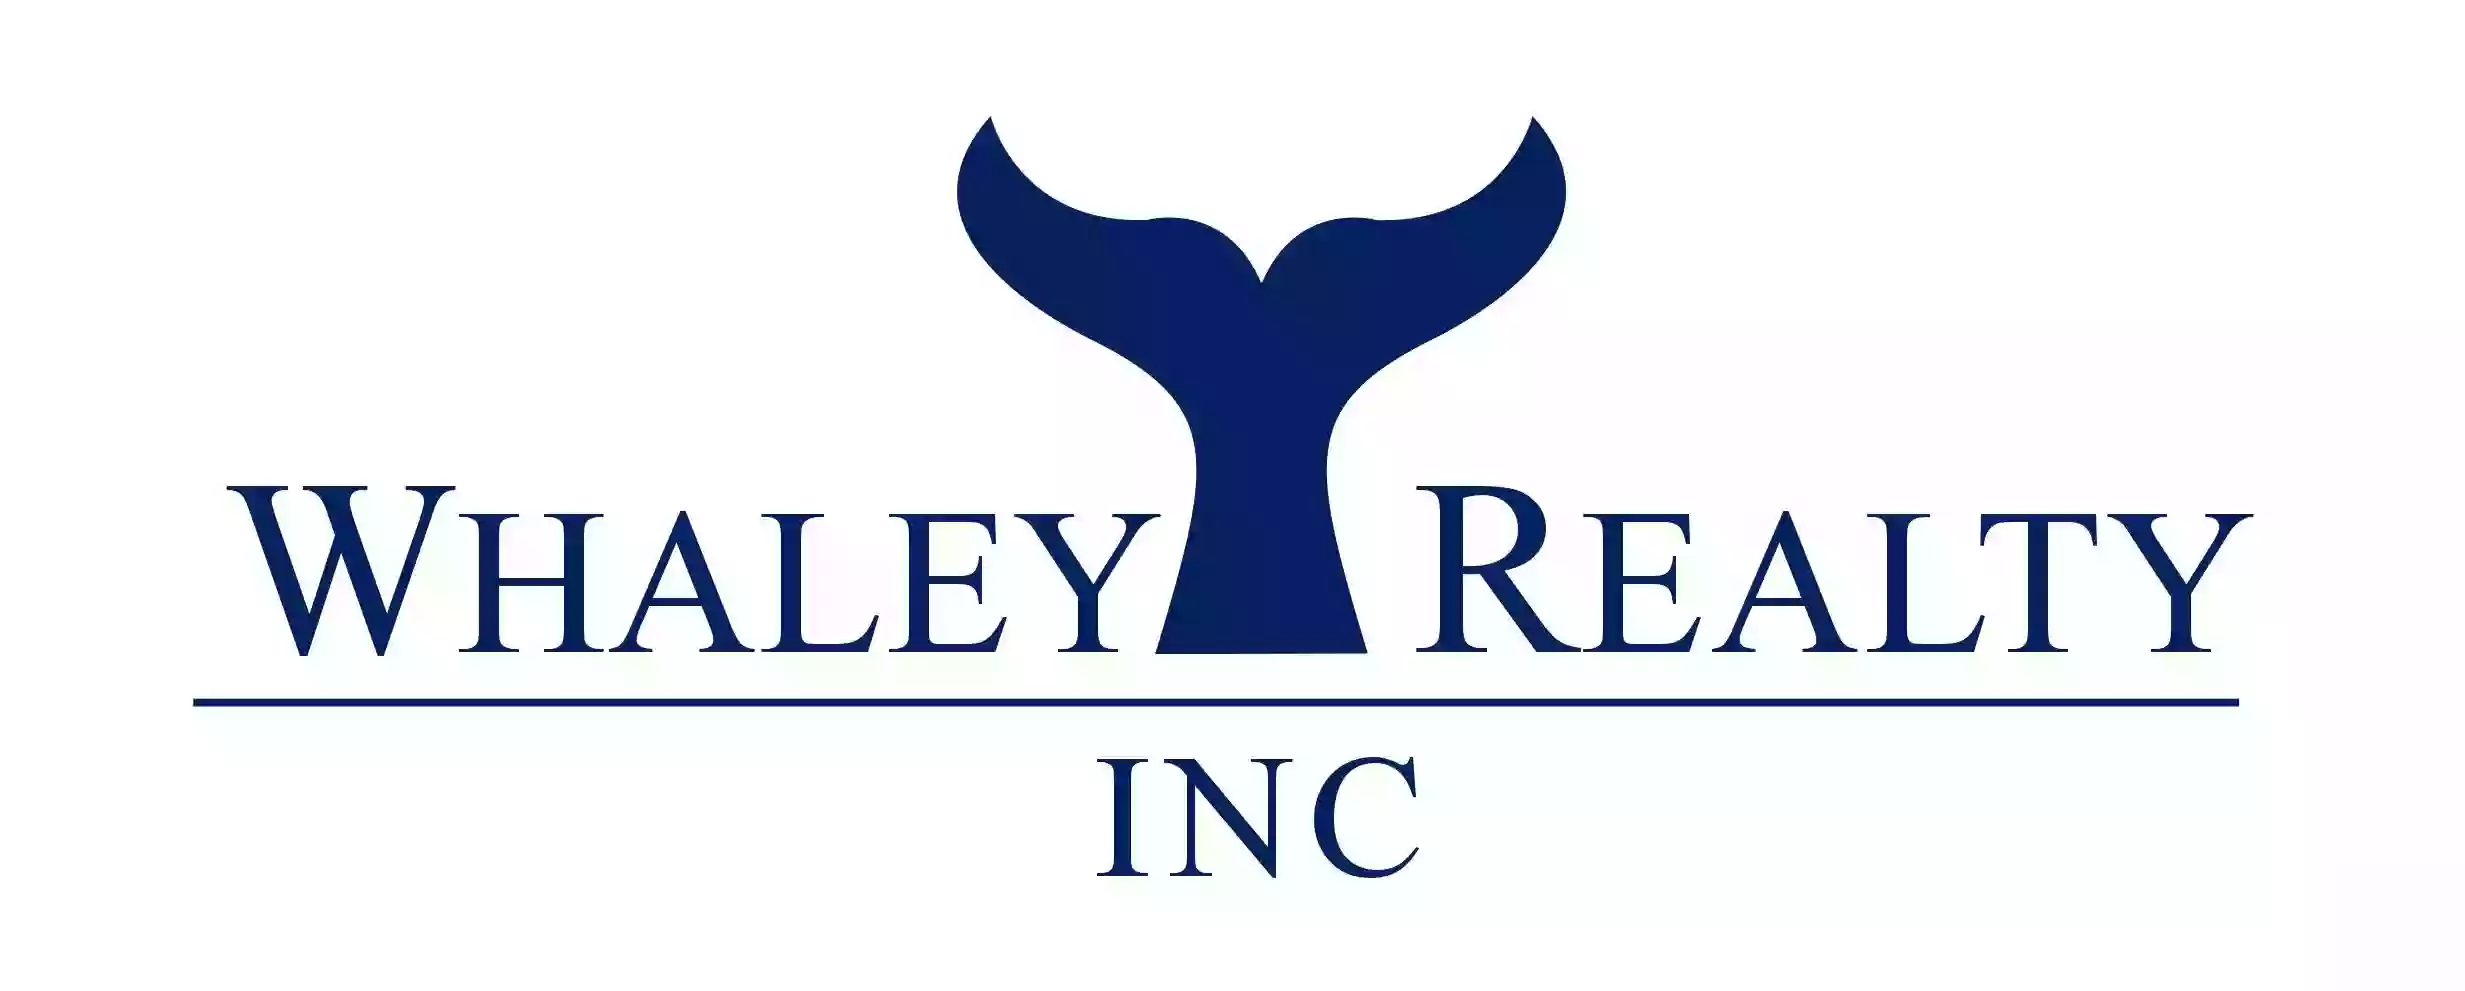 Whaley Realty, Inc.